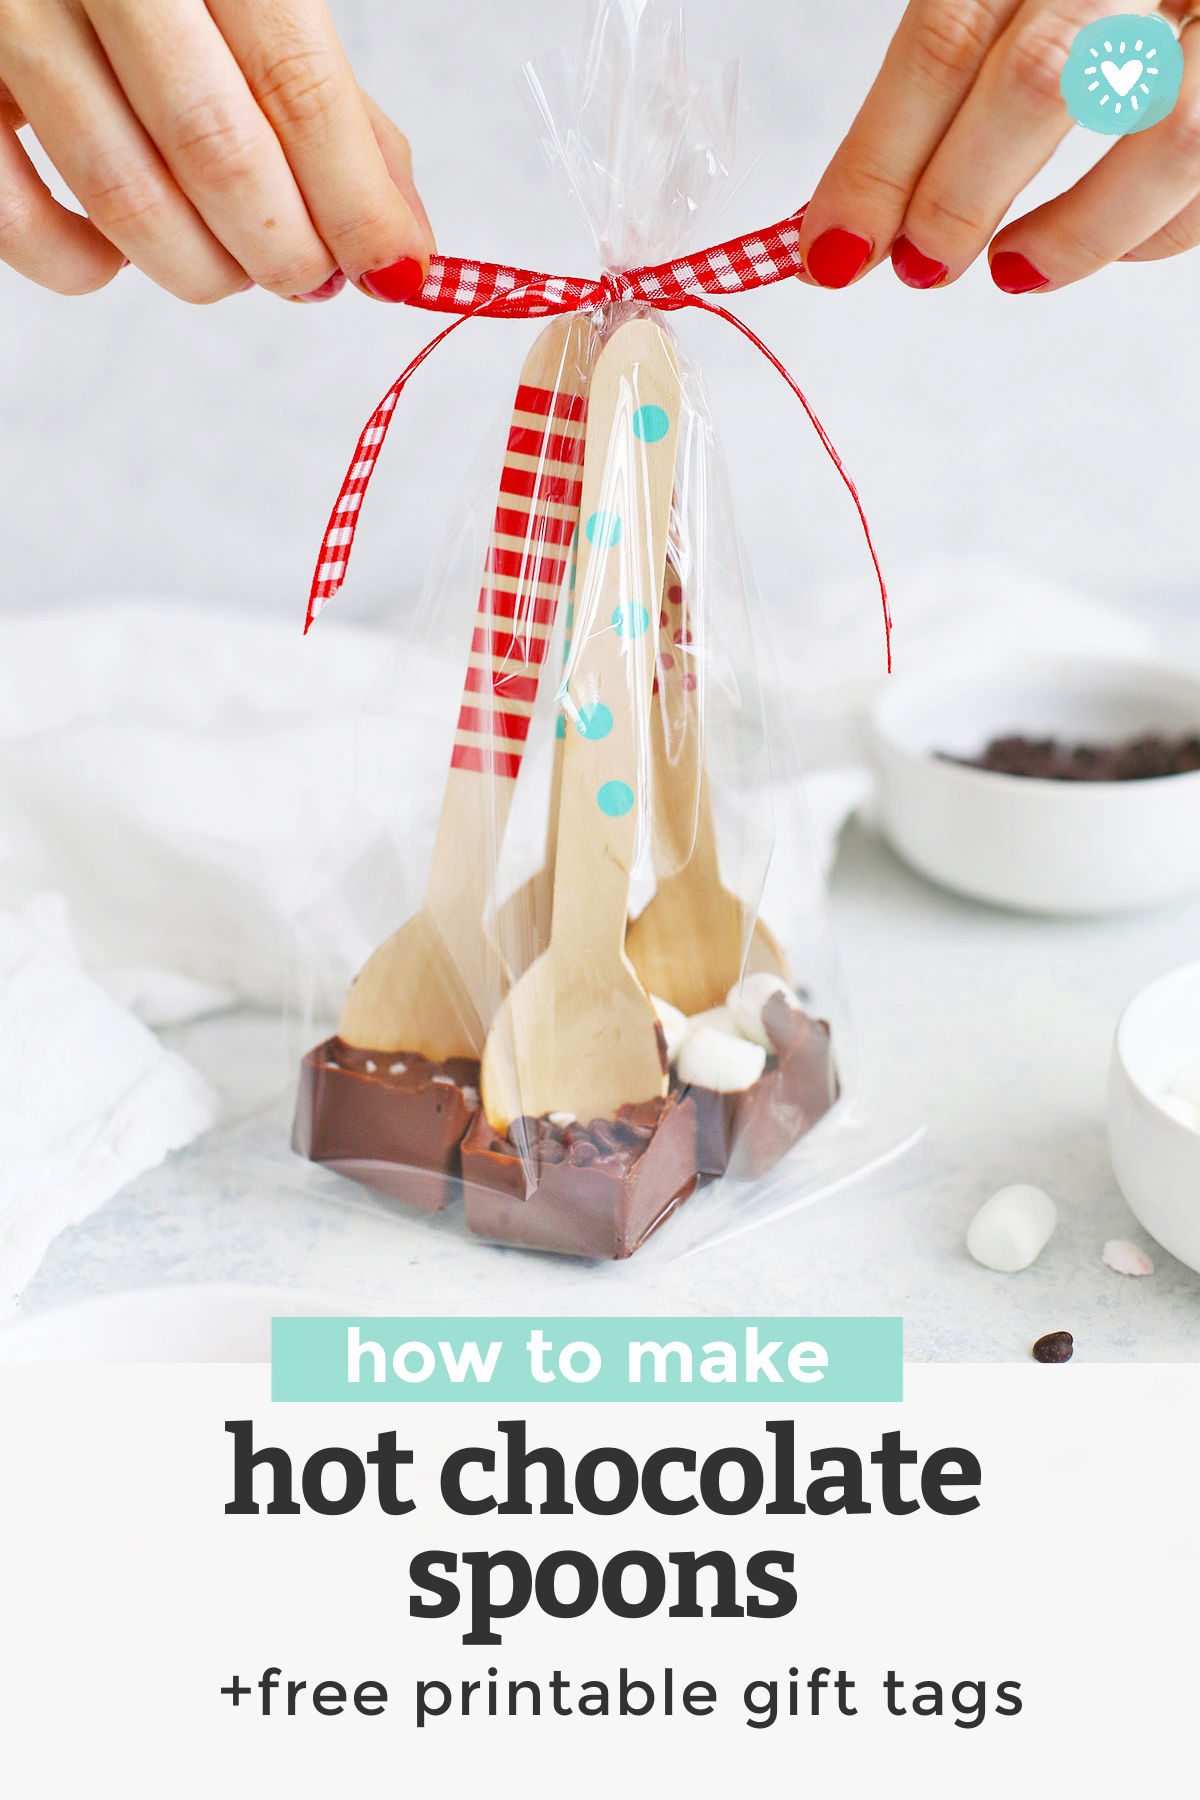 Hot Chocolate Spoons + FREE PRINTABLE GIFT TAGS! These chocolate-coated spoons are perfect for making homemade hot chocolate. They make a fun winter project or easy DIY holiday gift for friends and neighbors! (Gluten-free, dairy-free, paleo & vegan-friendly!)